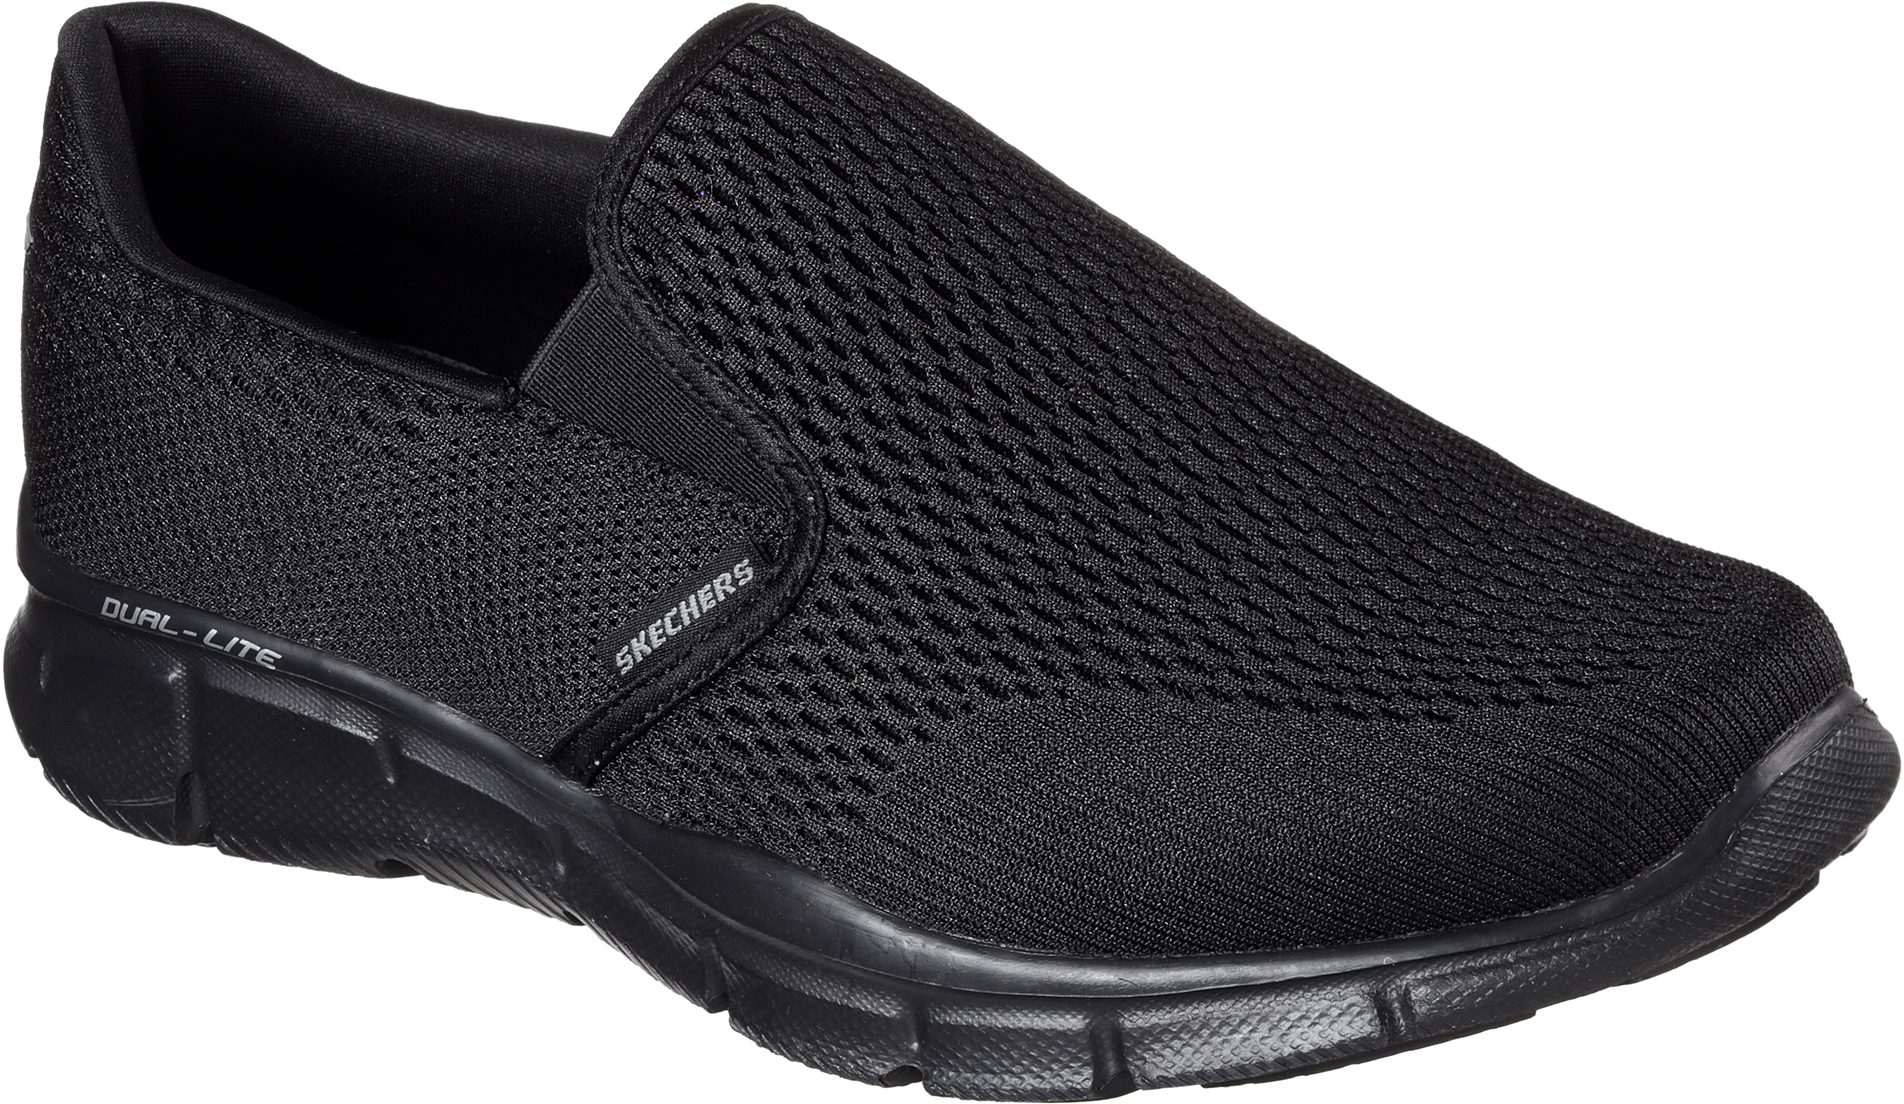 skechers equalizer double play